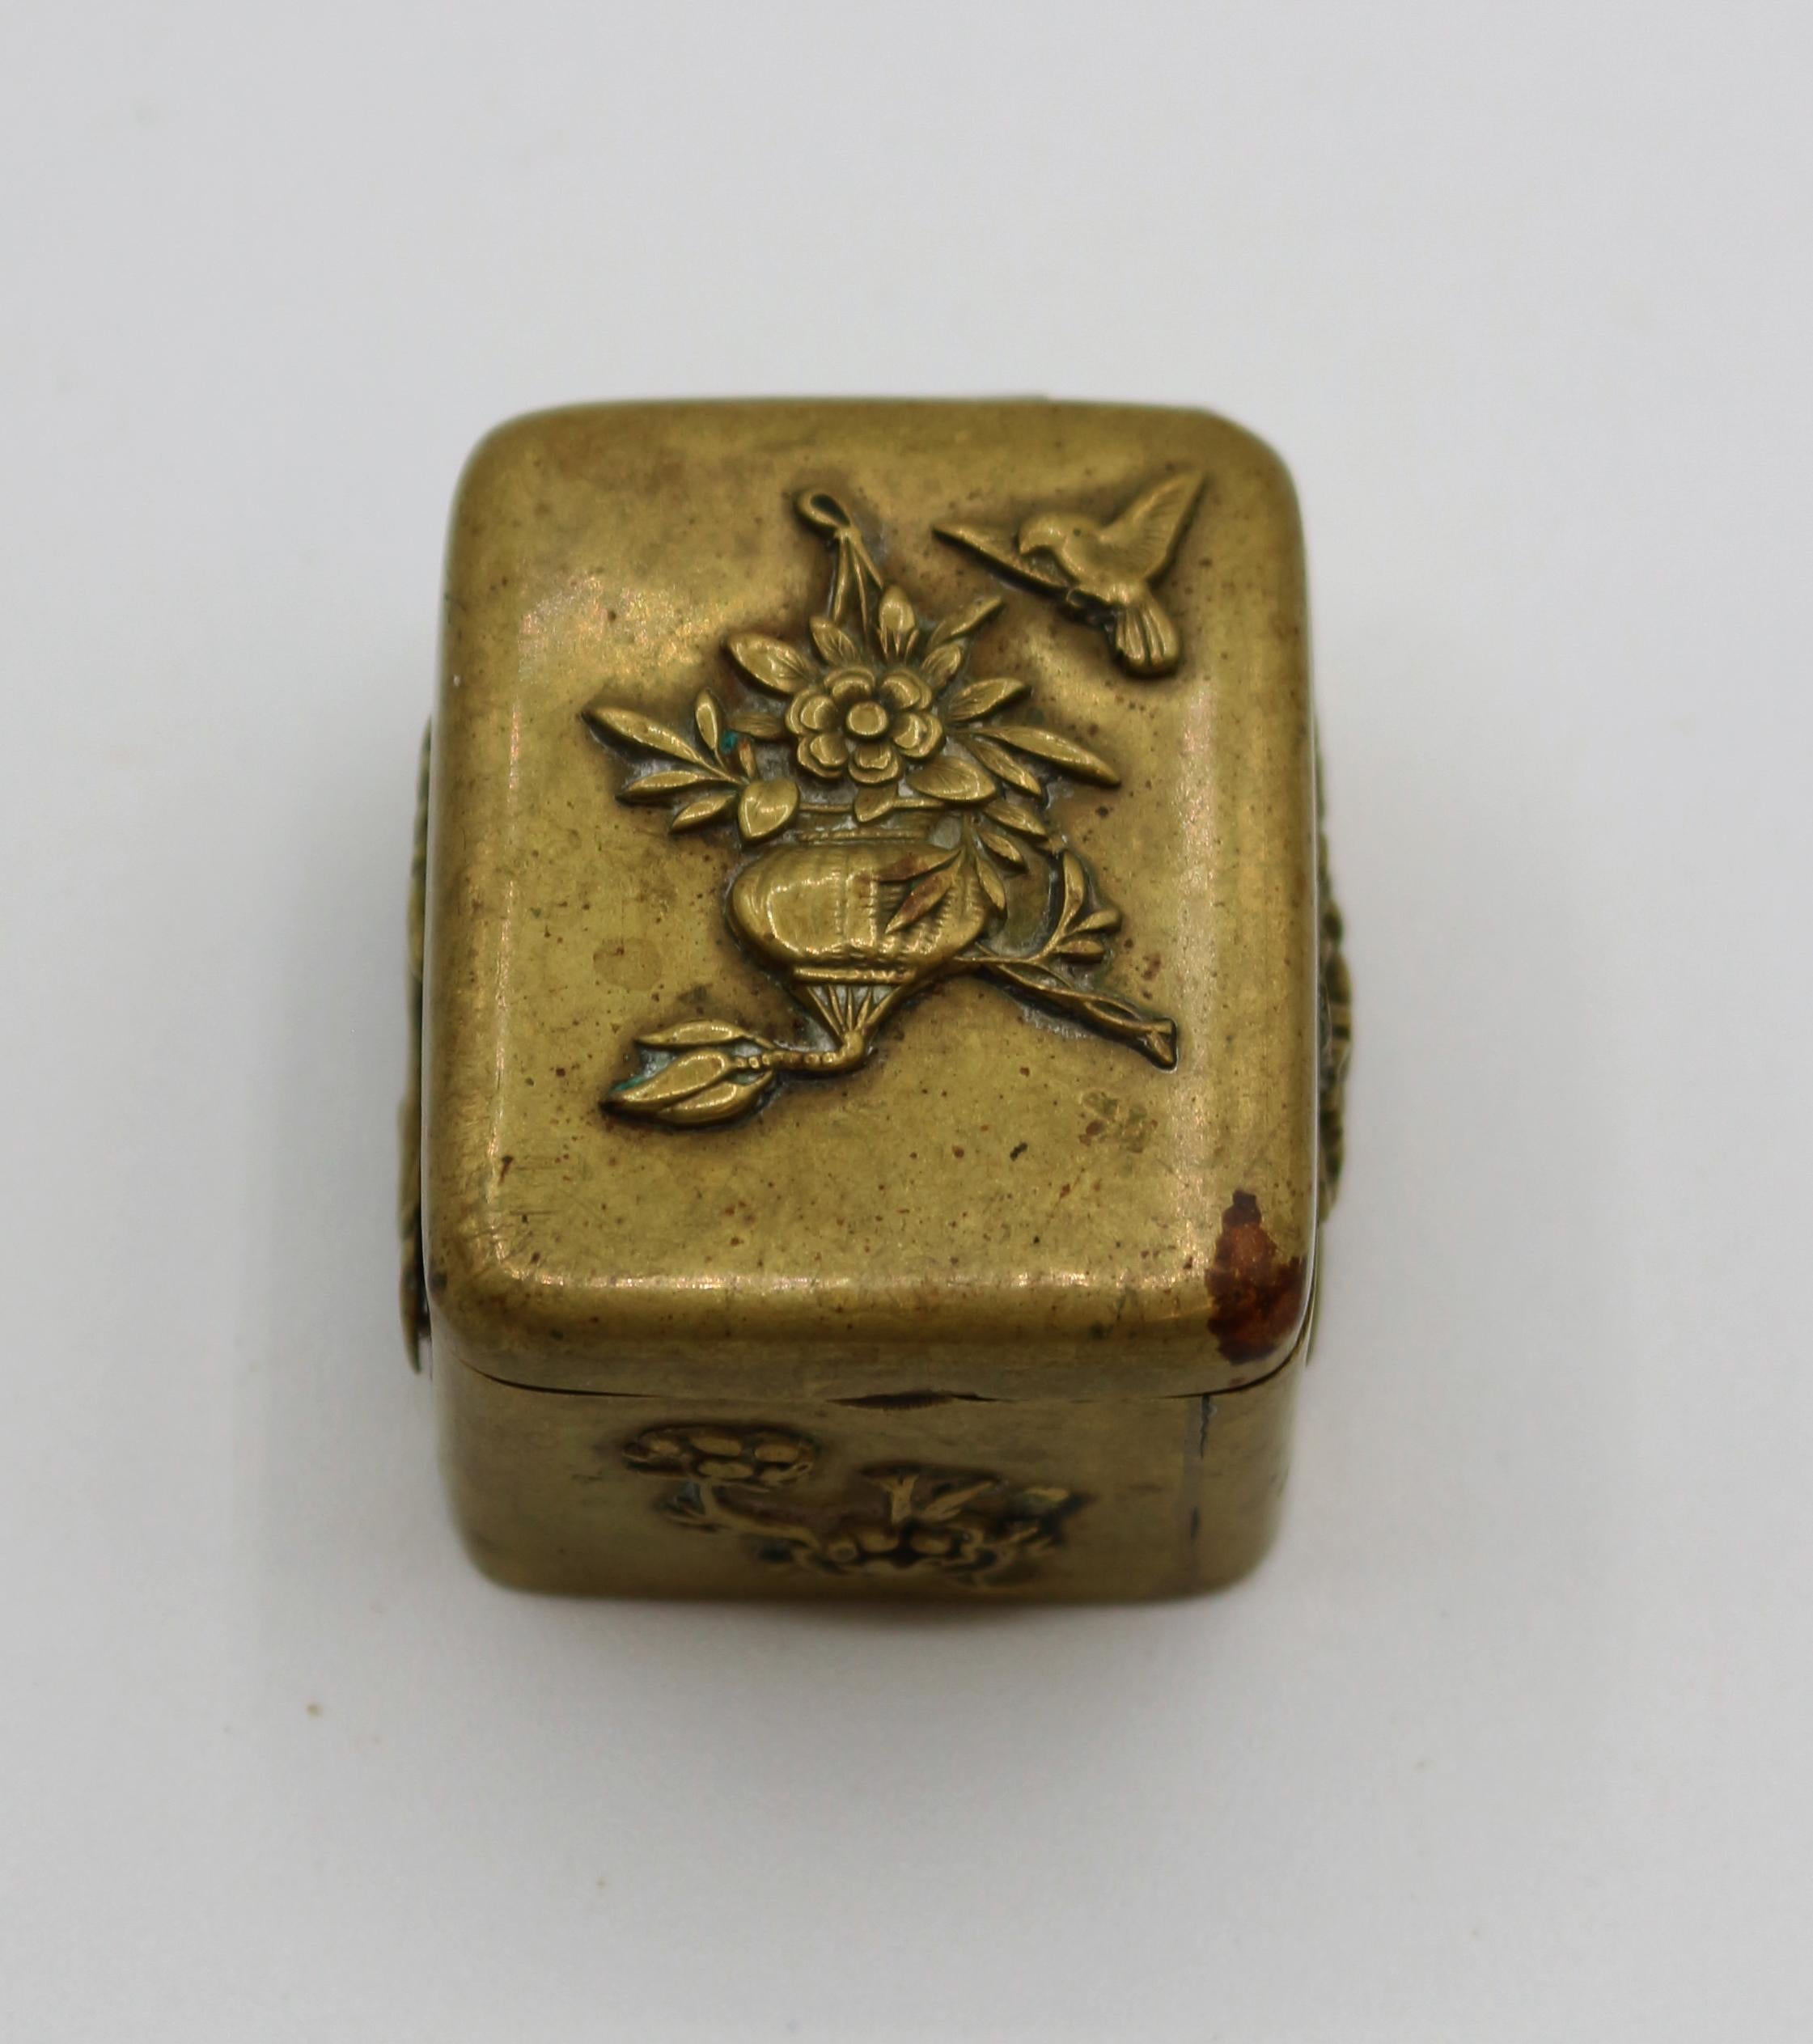 Mid-19th century Japanese Meiji period bronze stamp box. Applied castings of a hanging flower basket with bird, recumbent stag and flowers. Measures: 1 1/4